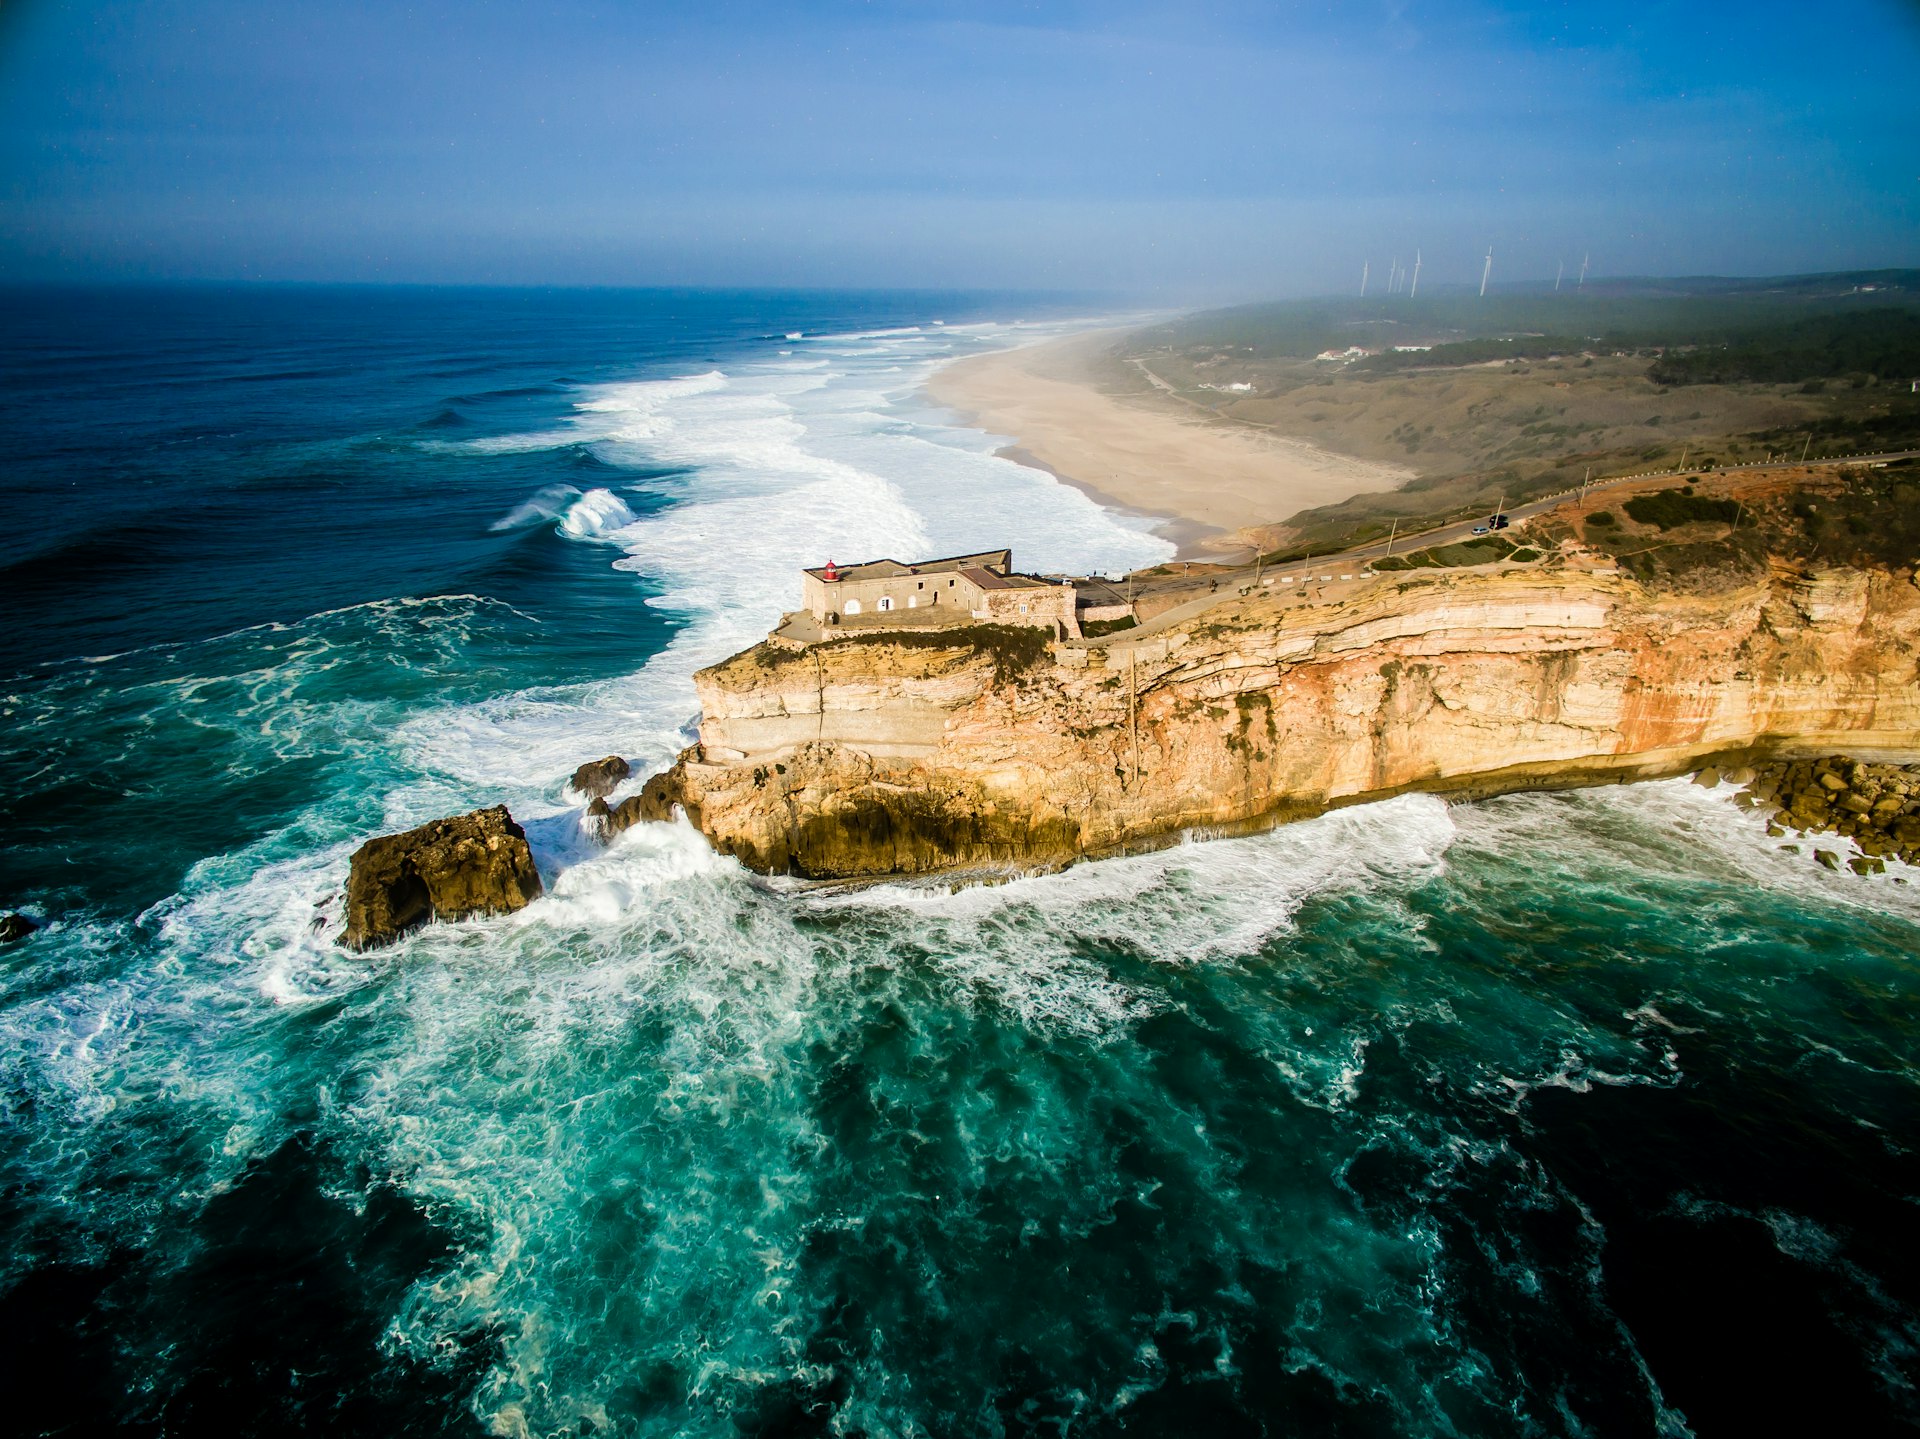 Aerial shot of a narrow peninsula with a clifftop building surrounded by rough blue ocean